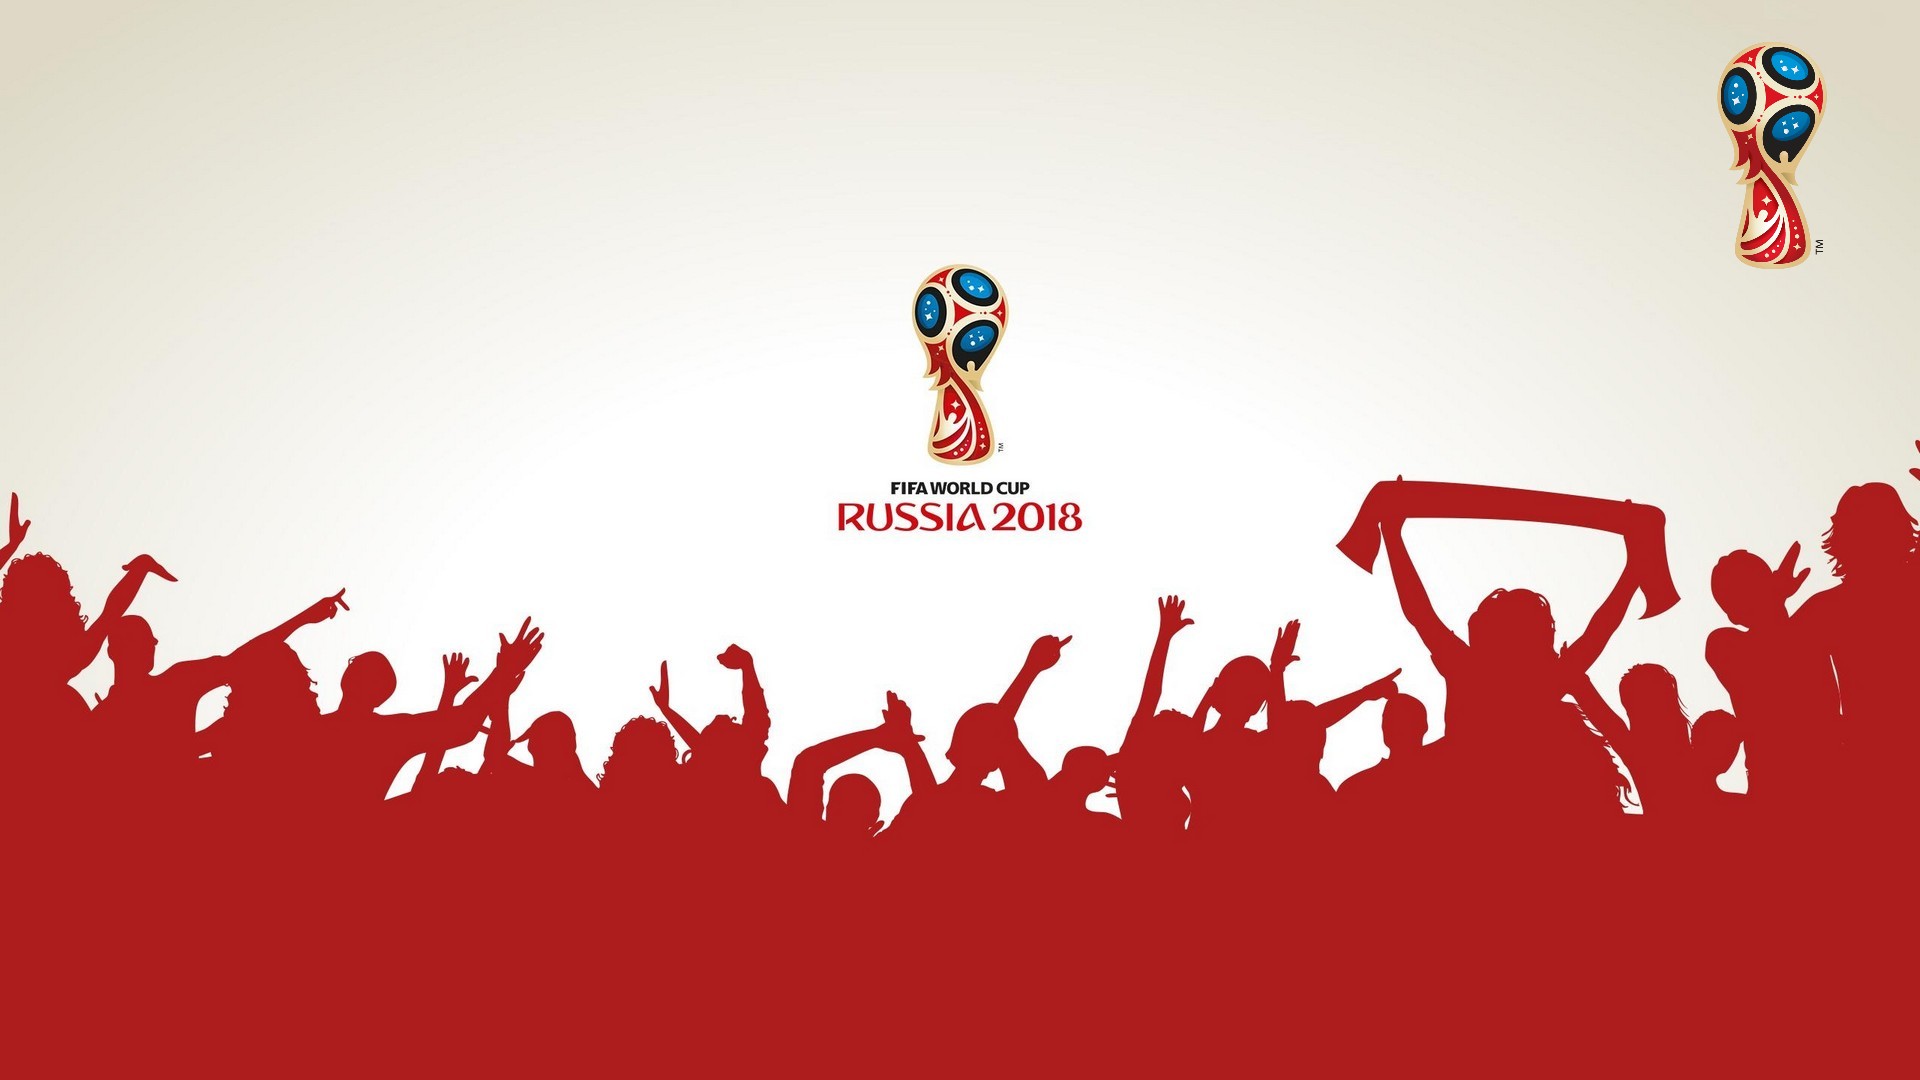 Wallpapers HD FIFA World Cup With Resolution 1920X1080 pixel. You can make this wallpaper for your Mac or Windows Desktop Background, iPhone, Android or Tablet and another Smartphone device for free